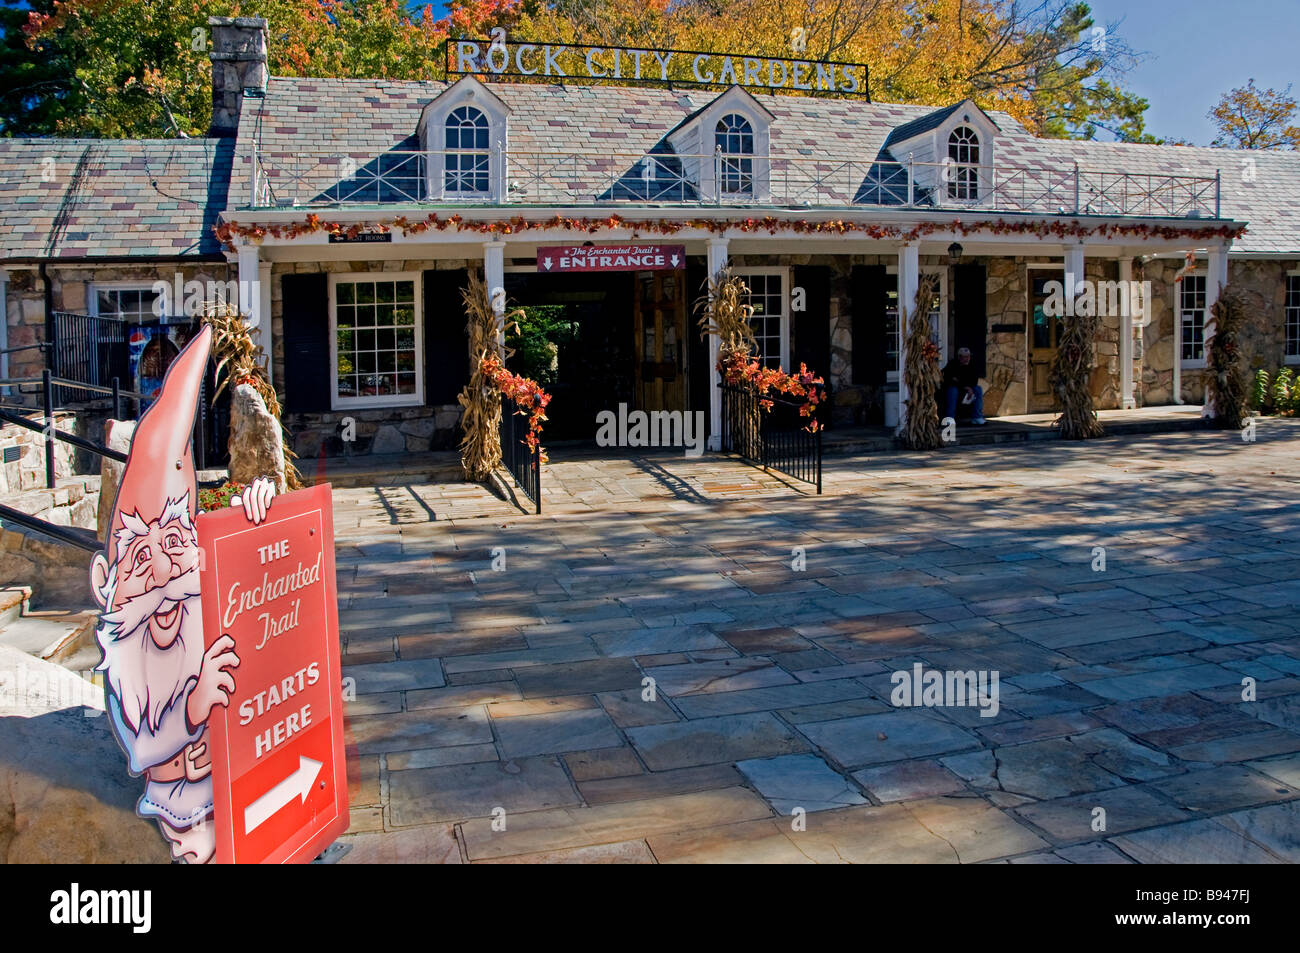 Visitor Center at Rock City Gardens on Lookout Mountain near Chattanooga TN Stock Photo